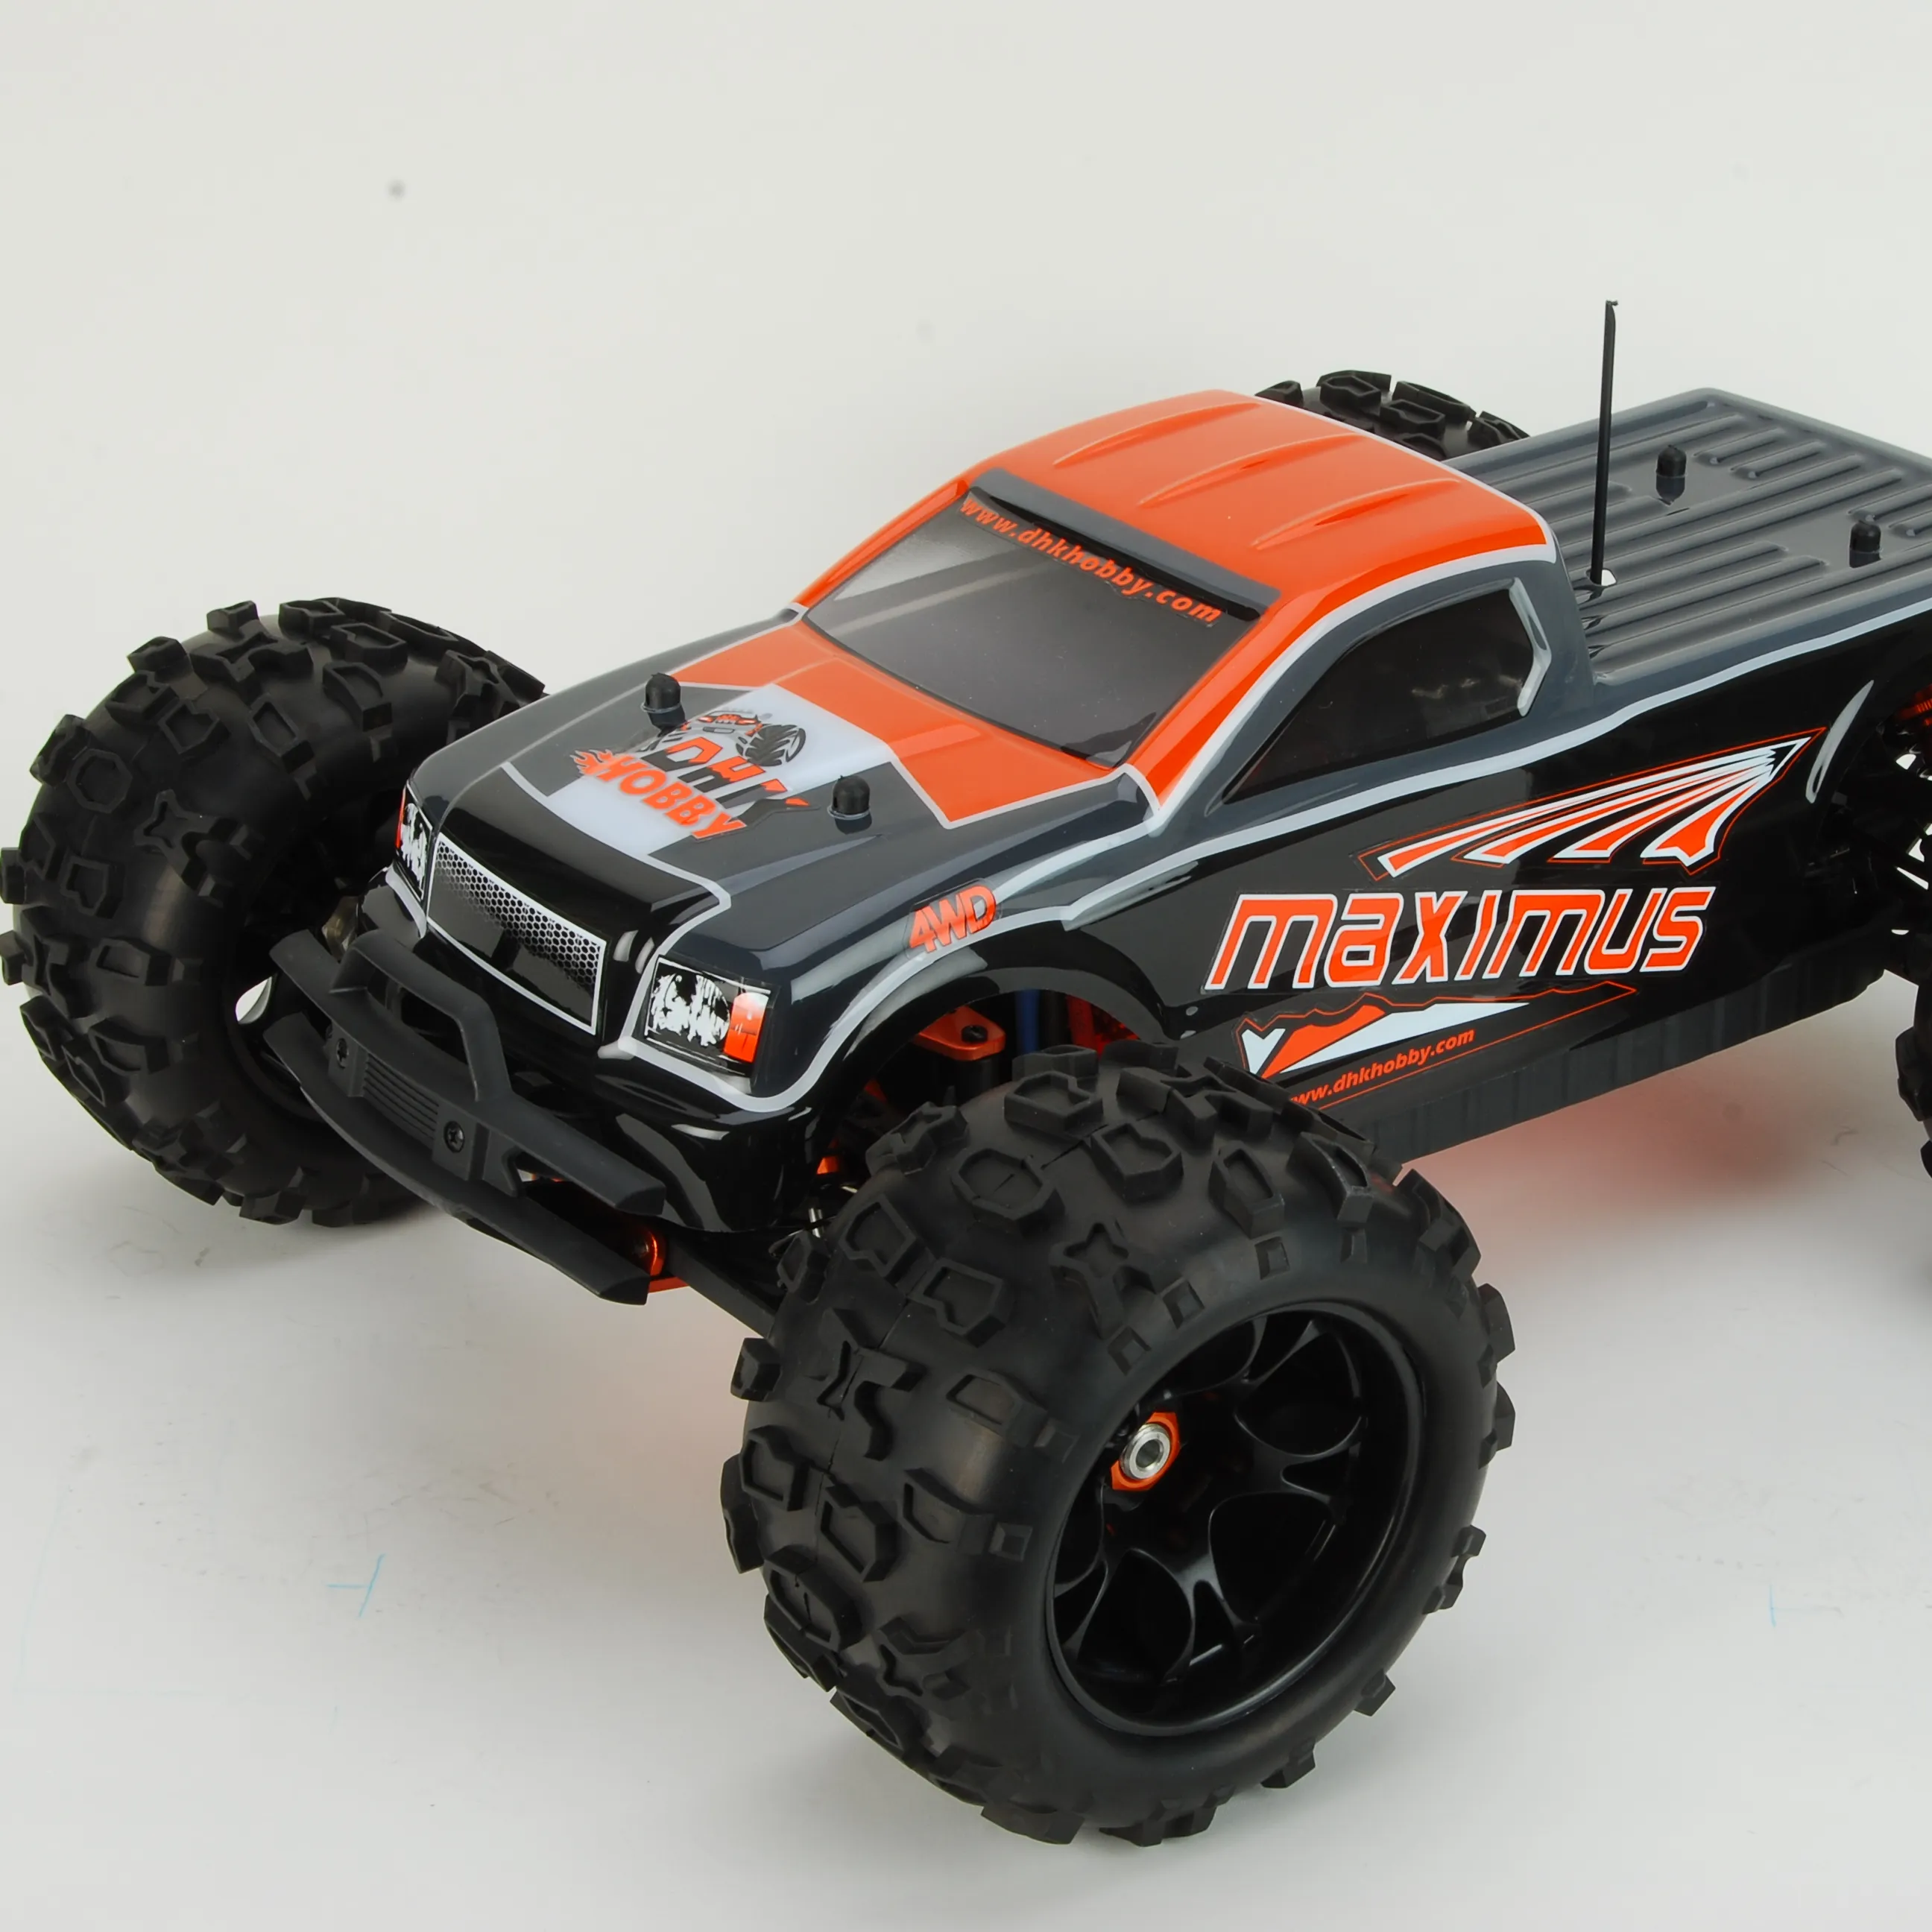 dhk 8382 Maximus 1/8 4WD BRUSHLESS OFF-ROAD TRUGGY - Ready to run RC Car toys Monster Truck